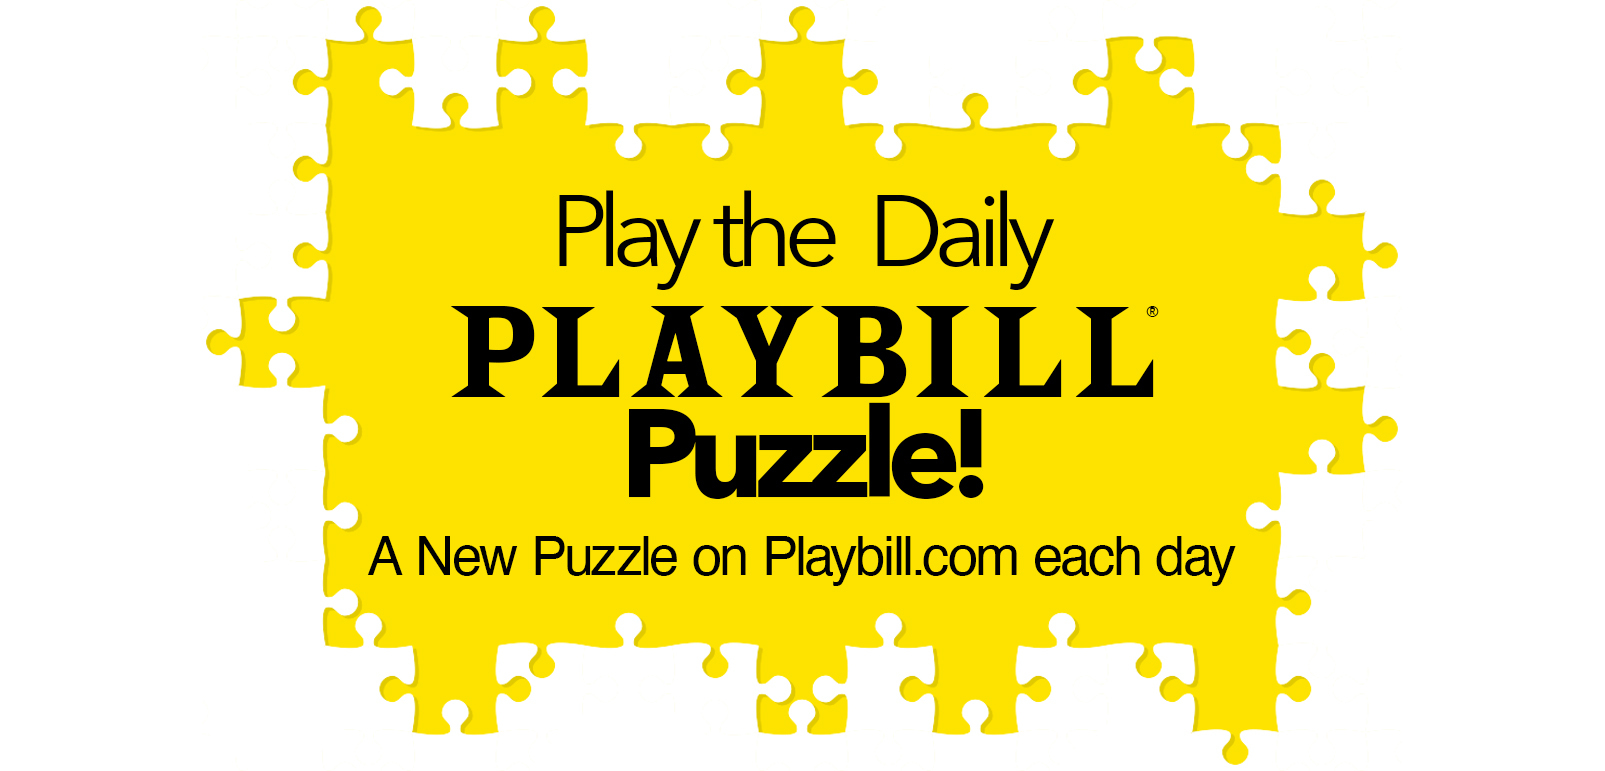 Play the Daily Playbill Puzzle!